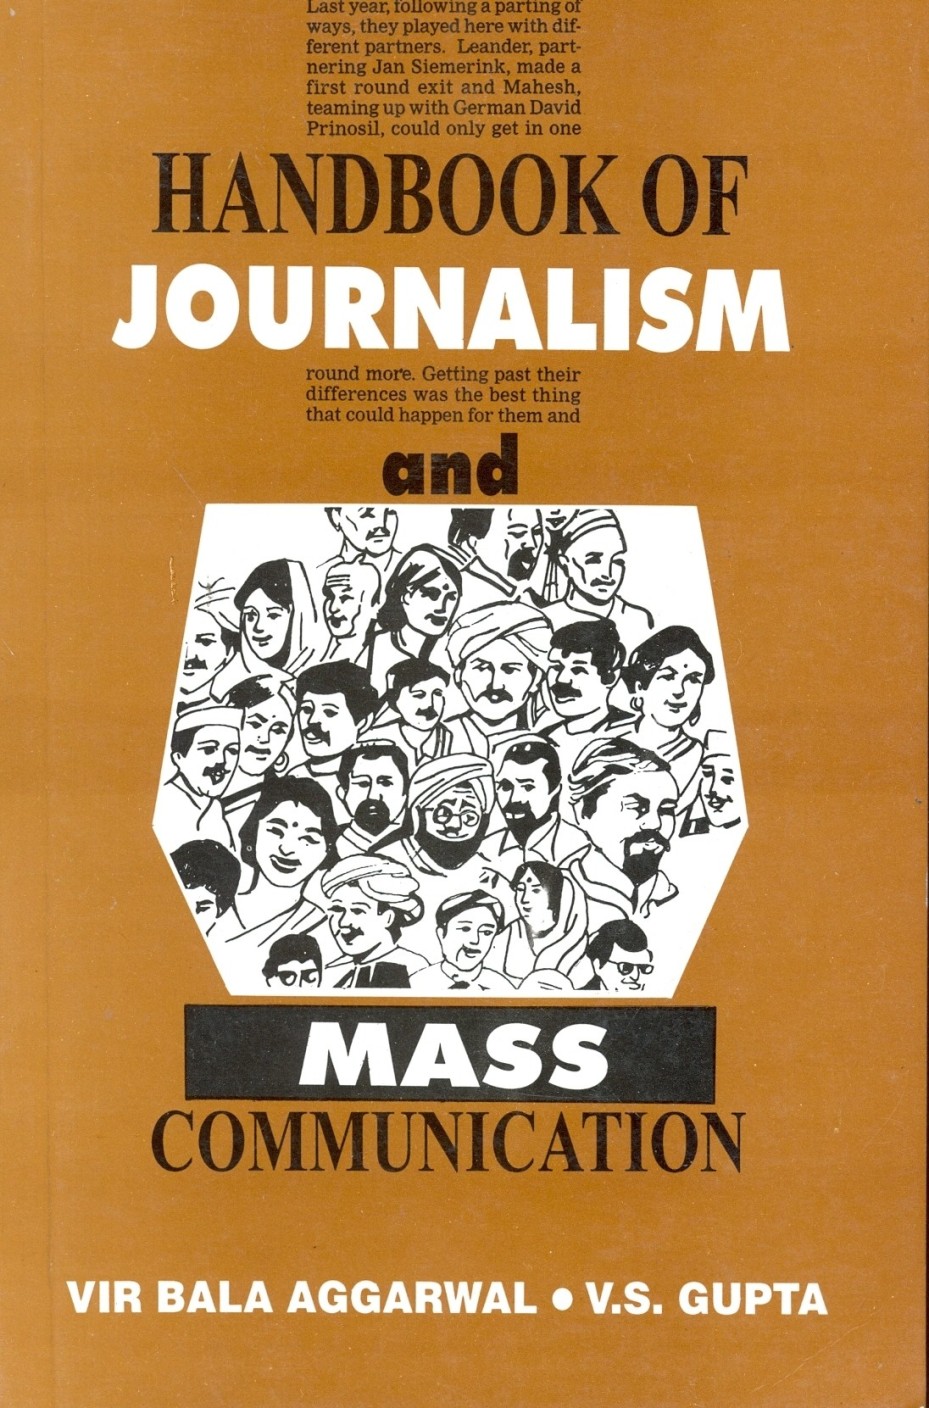 research topics in mass communication and journalism in india